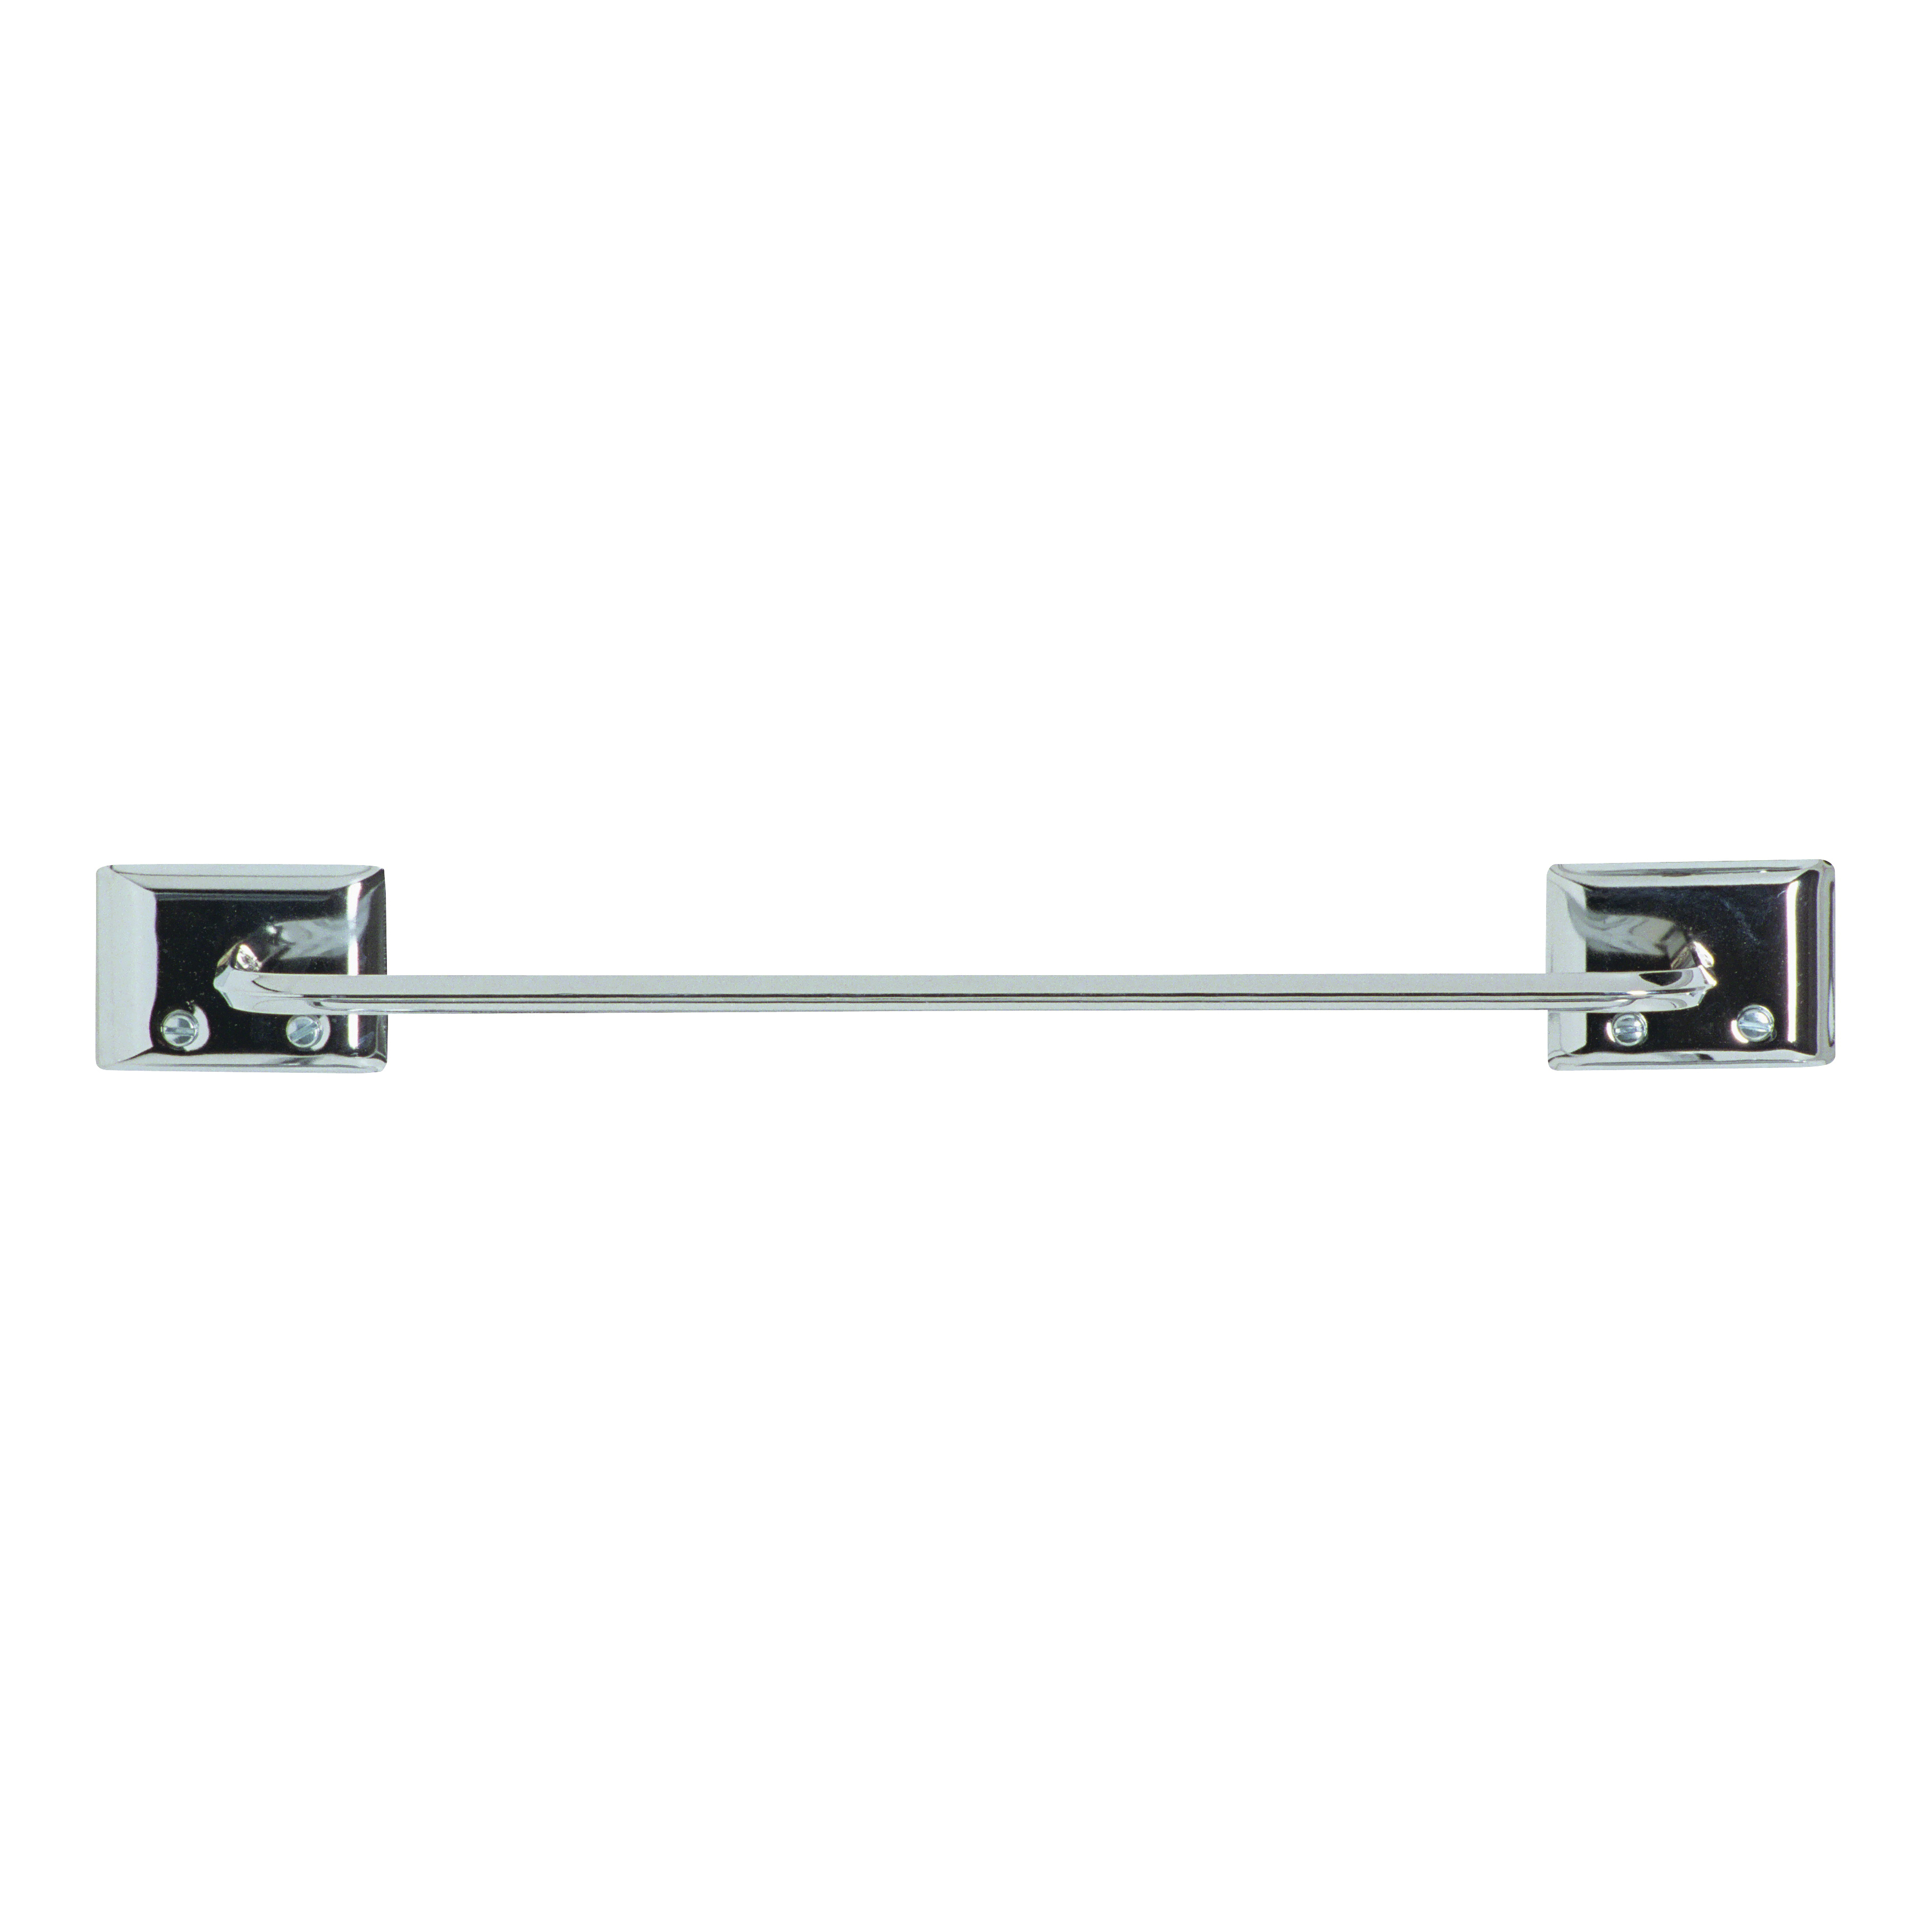 38120 Towel Bar, 12 in L Rod, Steel, Chrome, Surface Mounting